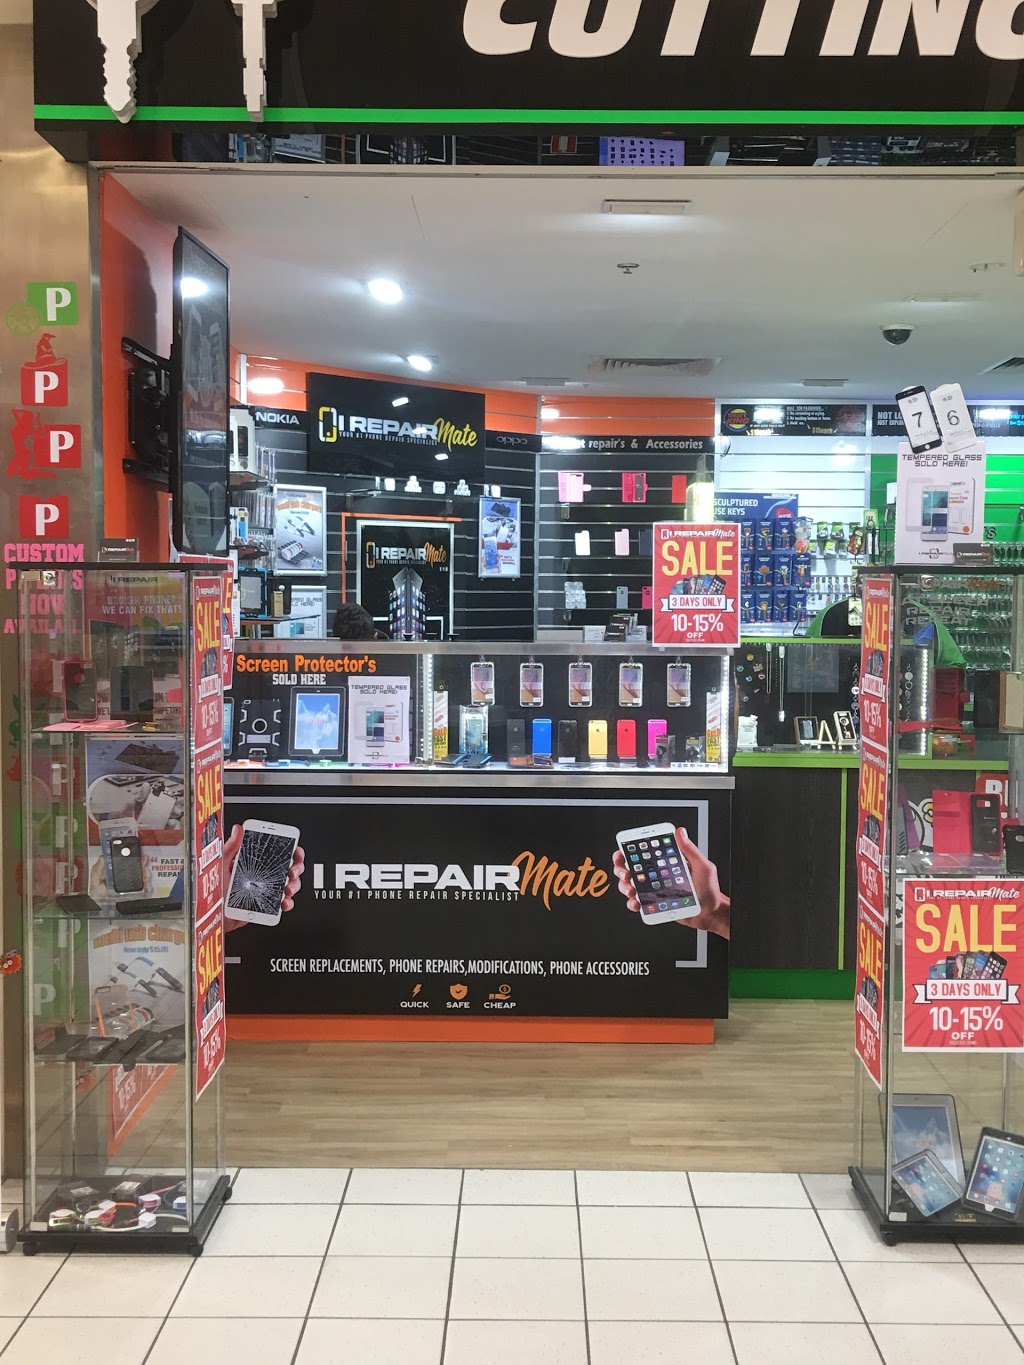 I Repair Mate Mobile Phone Repairs & Accessories | store | Shop 44 Mid Valley shopping centre, Morwell VIC 3840, Australia | 0401451992 OR +61 401 451 992